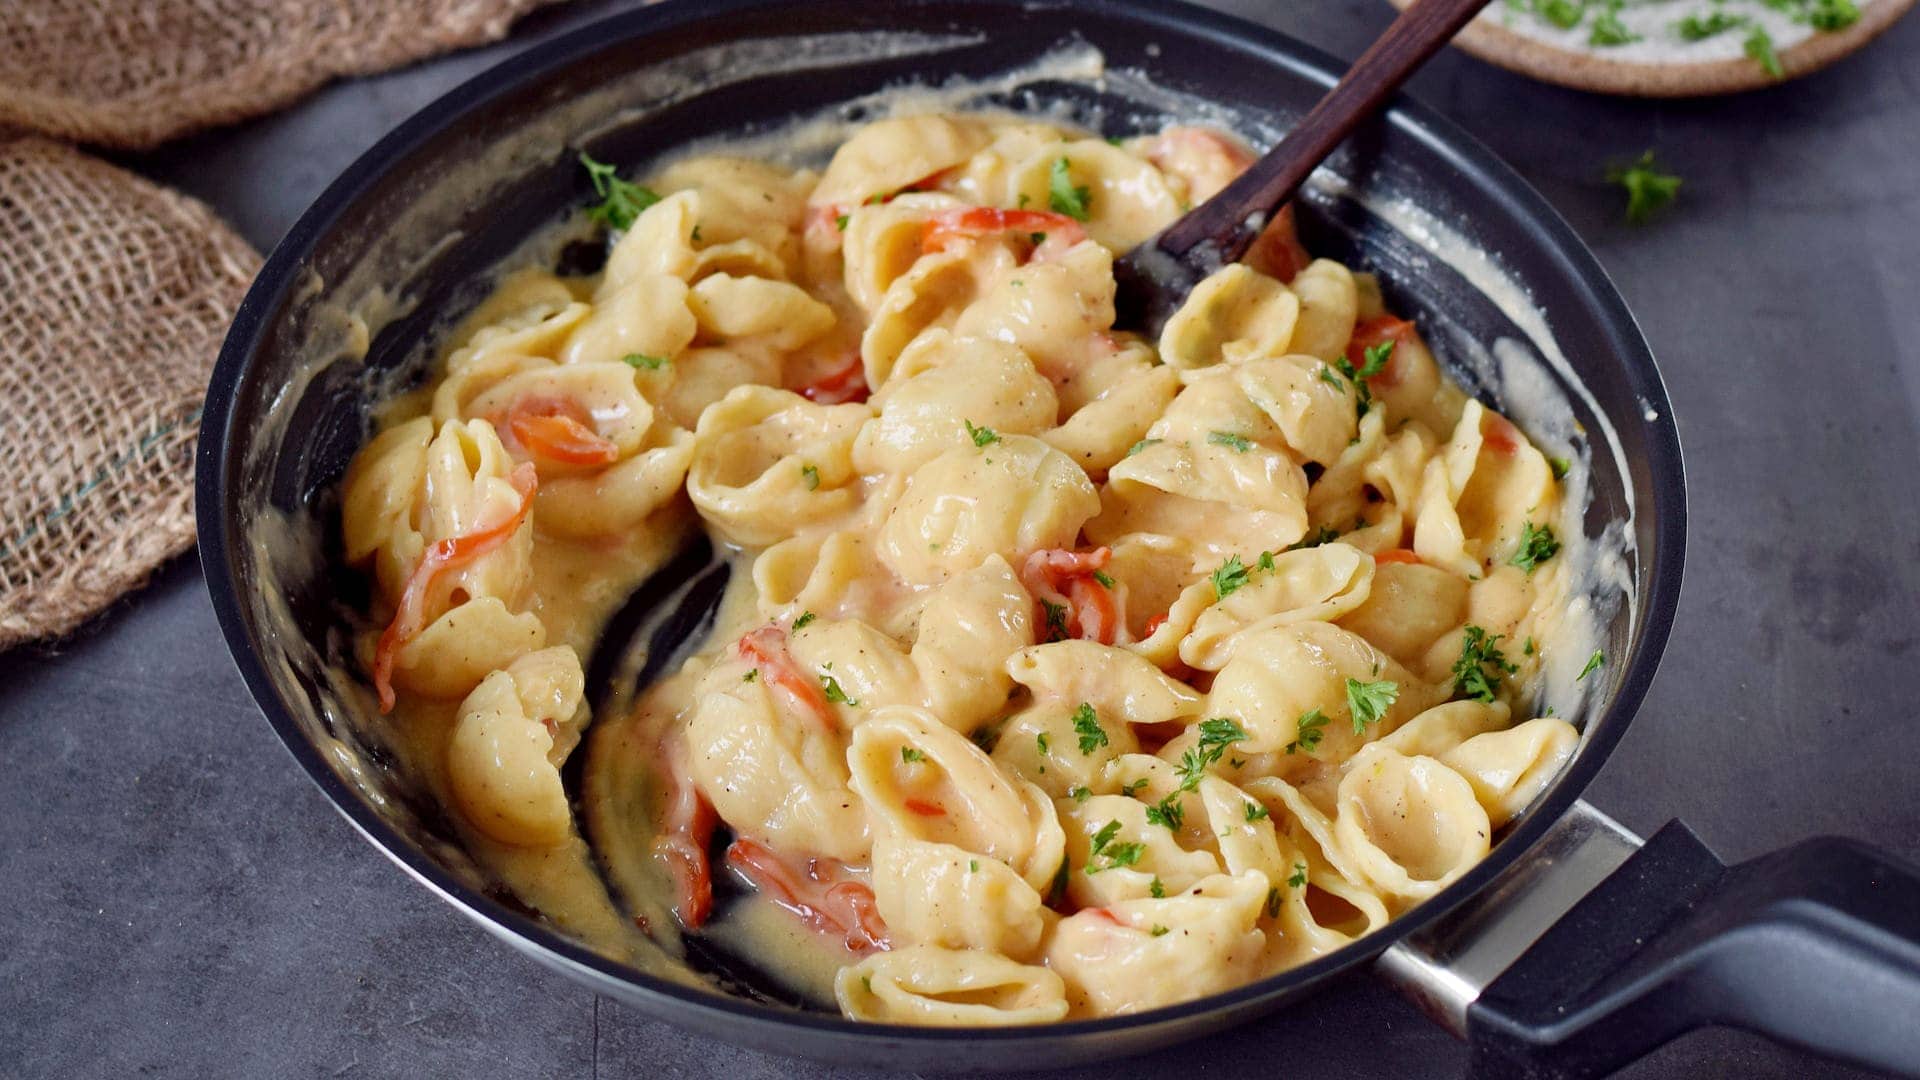 landscape photo of egg-free noodles with garlic butter sauce in a skillet